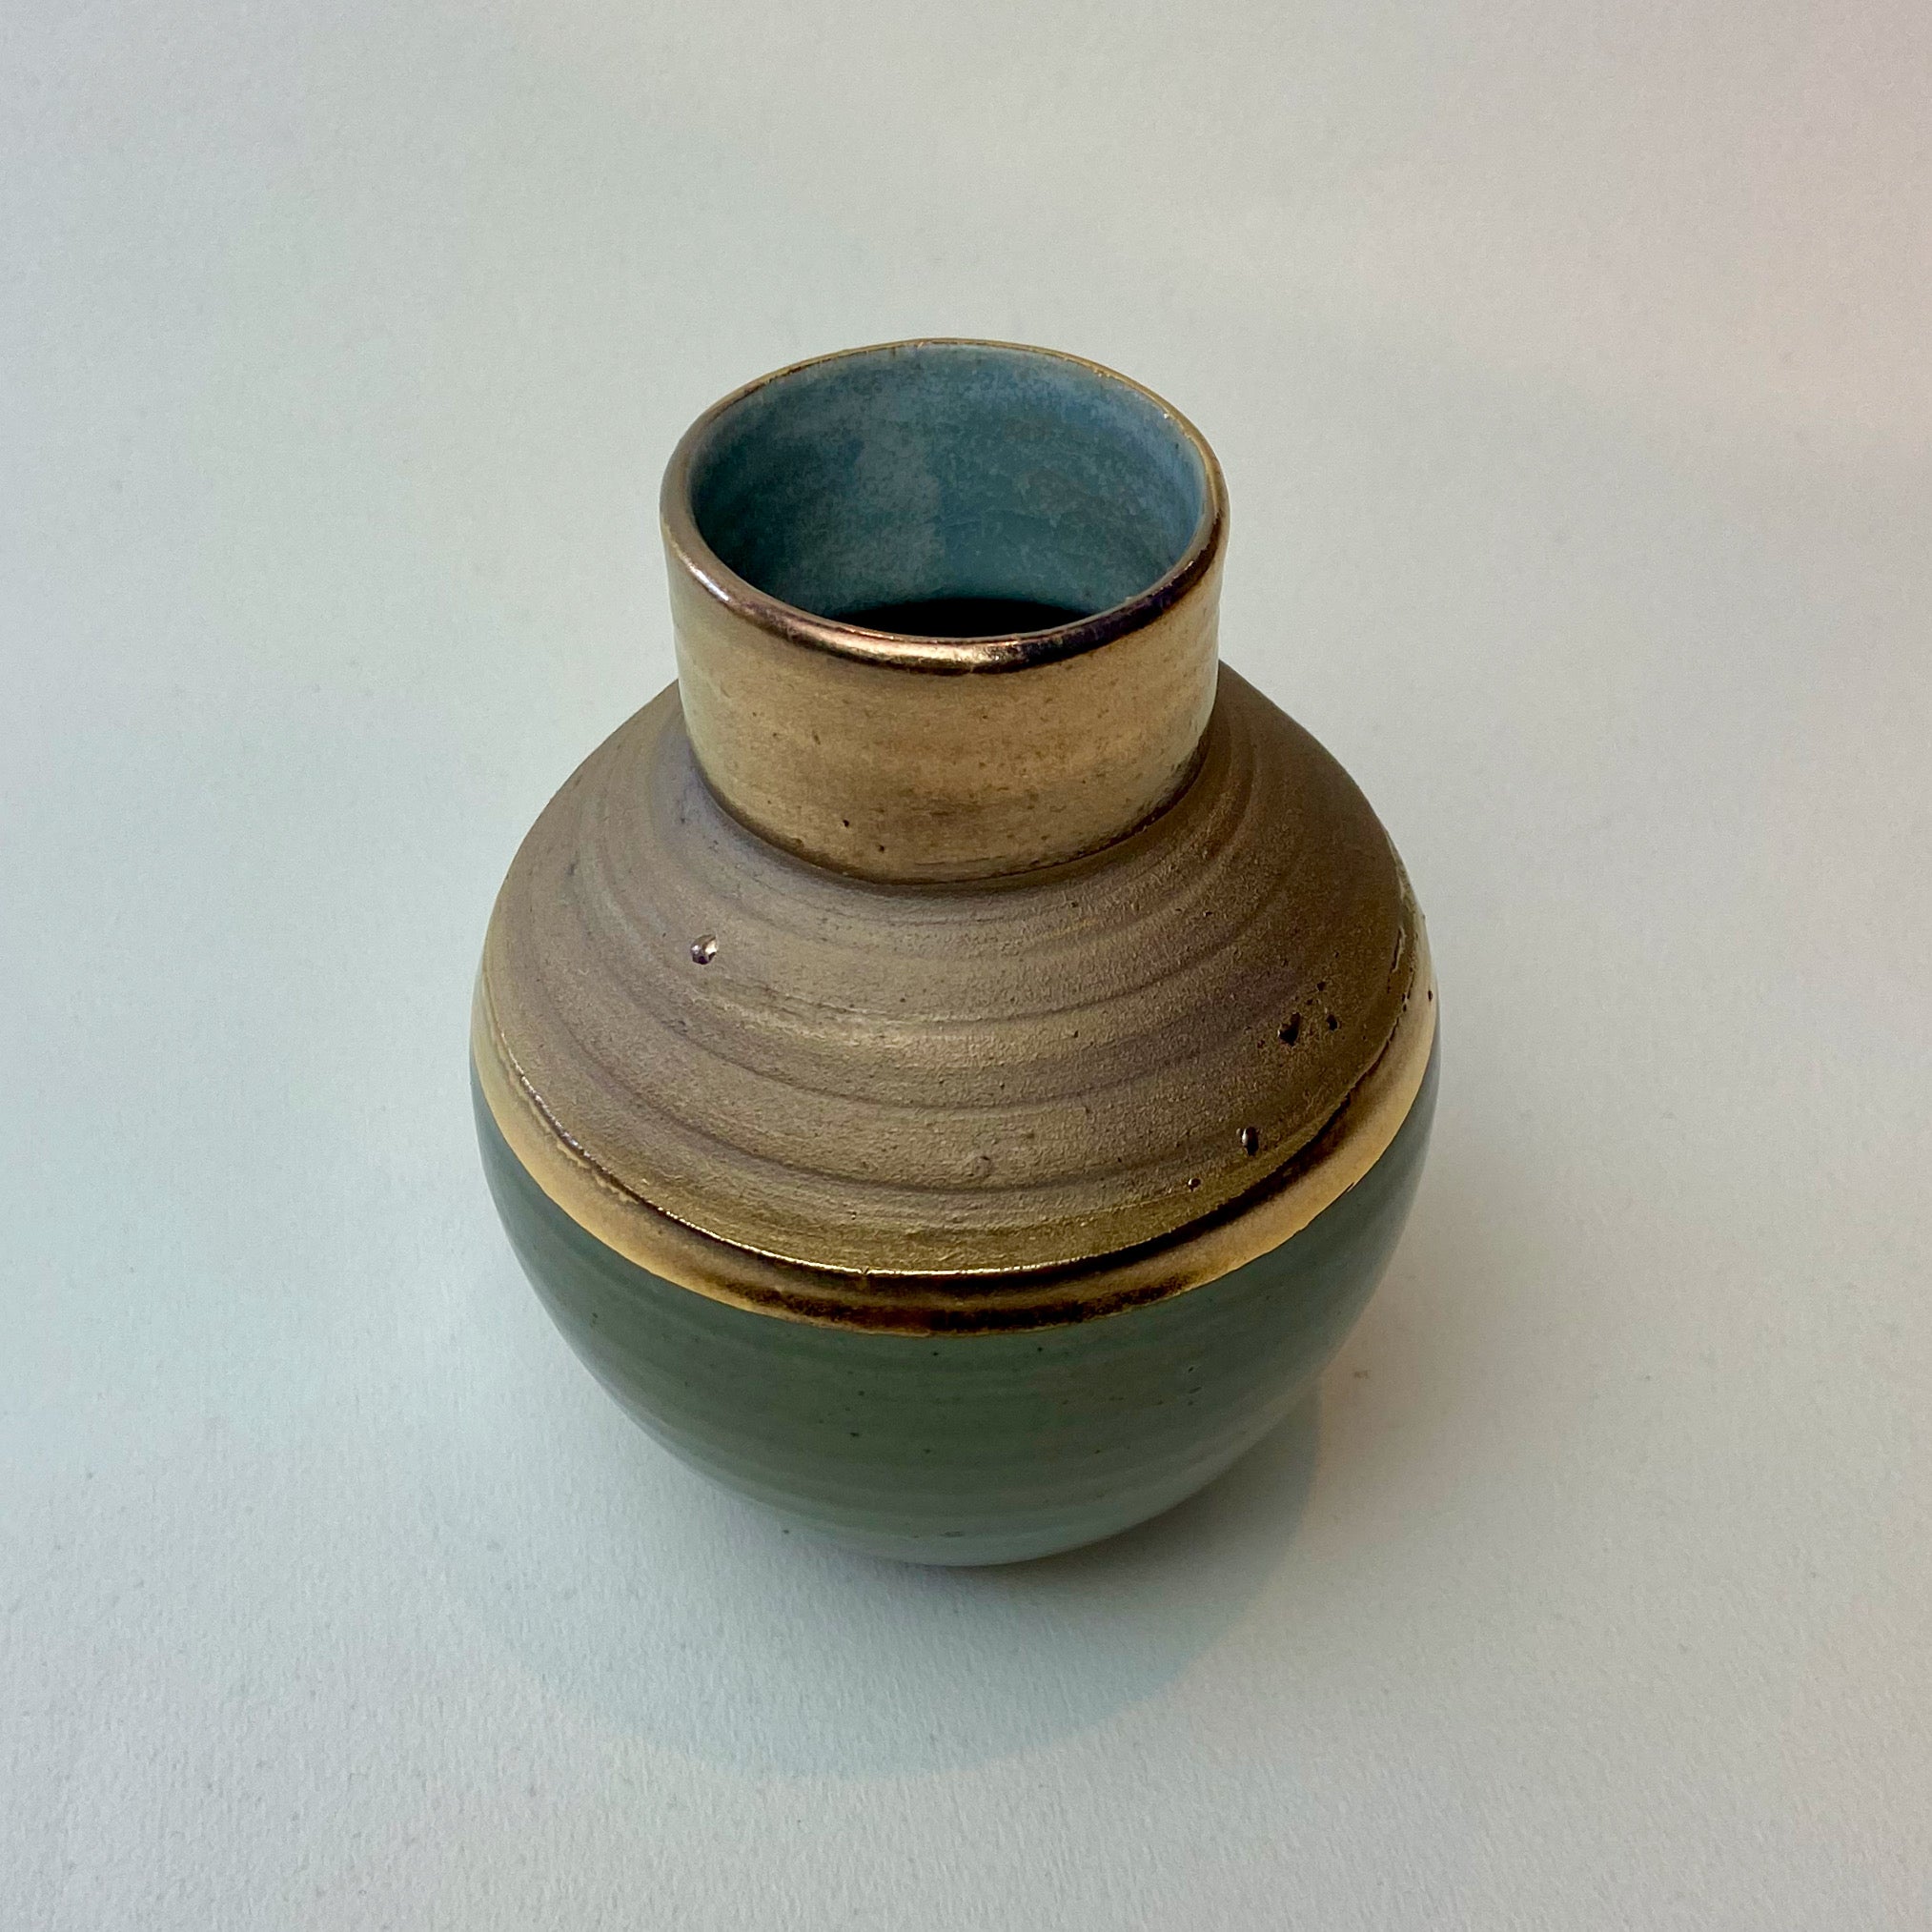 Hand Thrown Stoneware Pot 10cms with Gold - The Nancy Smillie Shop - Art, Jewellery & Designer Gifts Glasgow